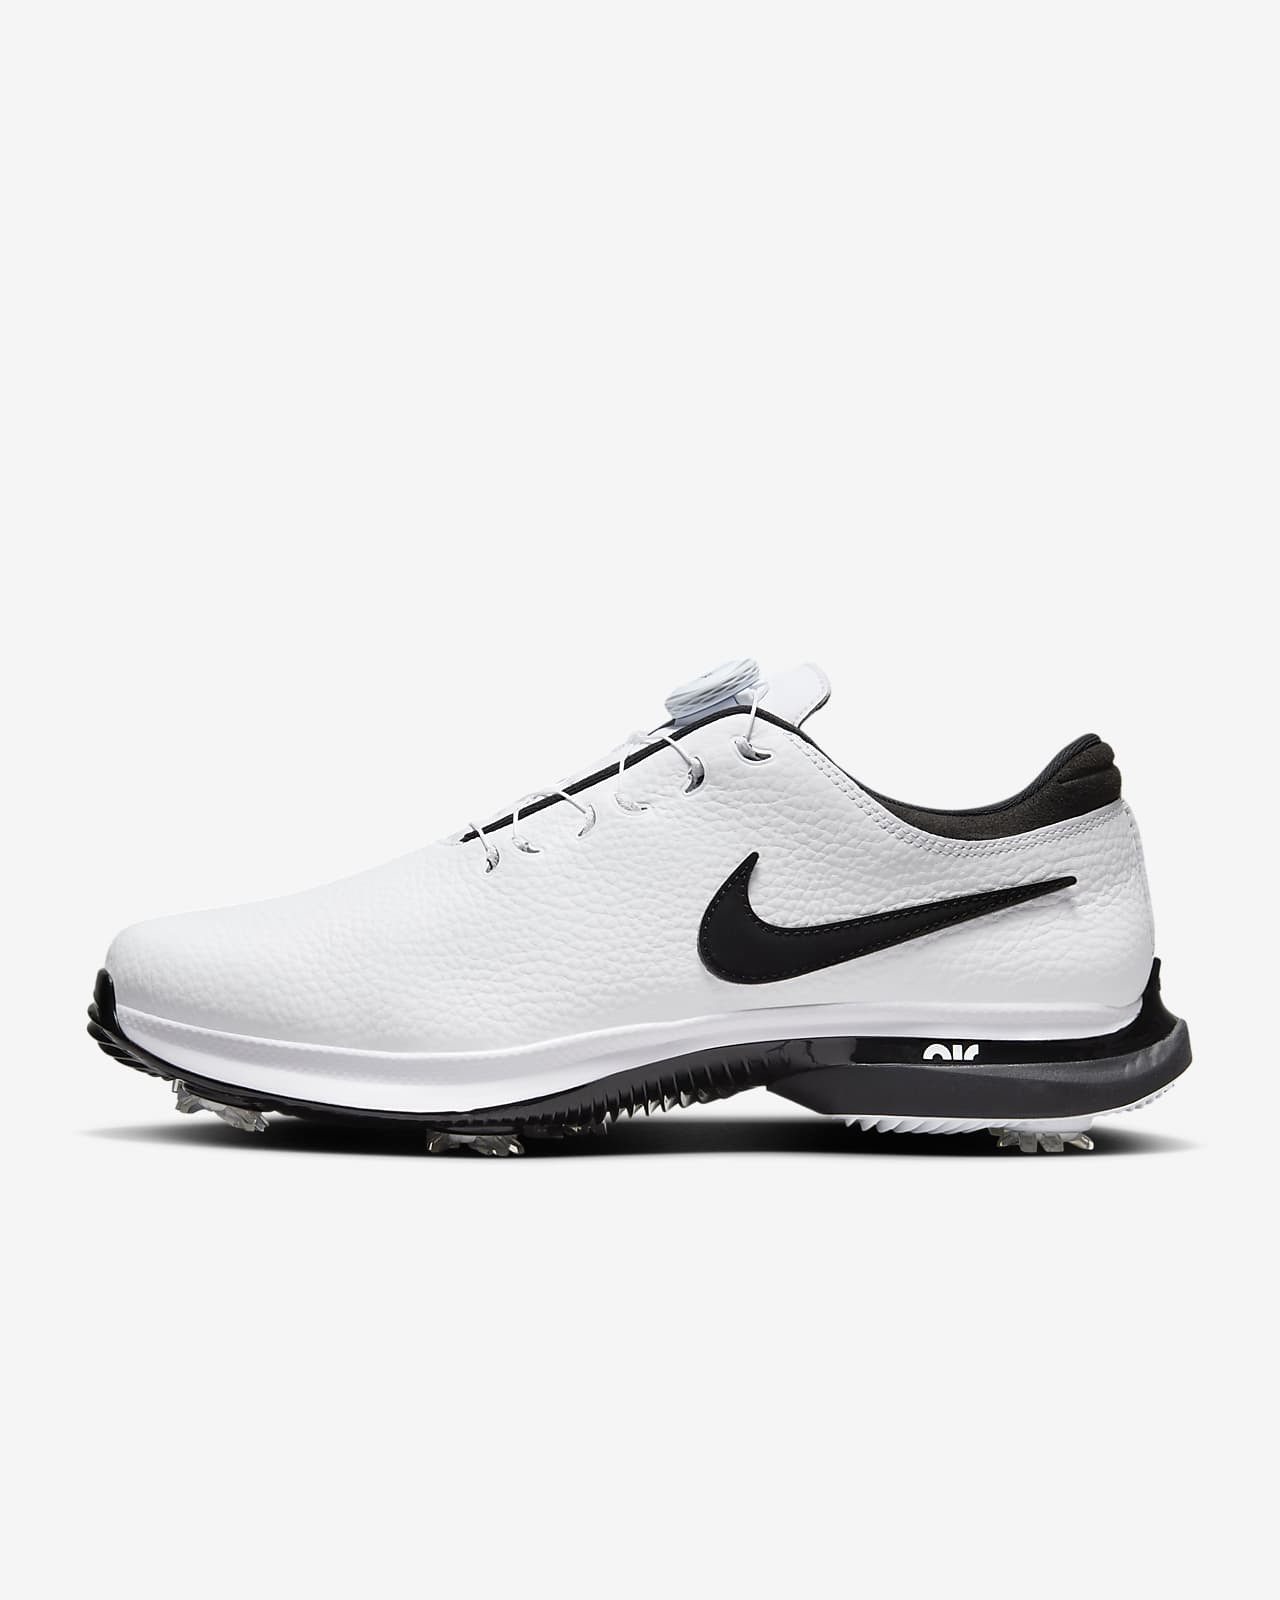 Air Zoom Victory Tour 3 BOA Golf Shoes